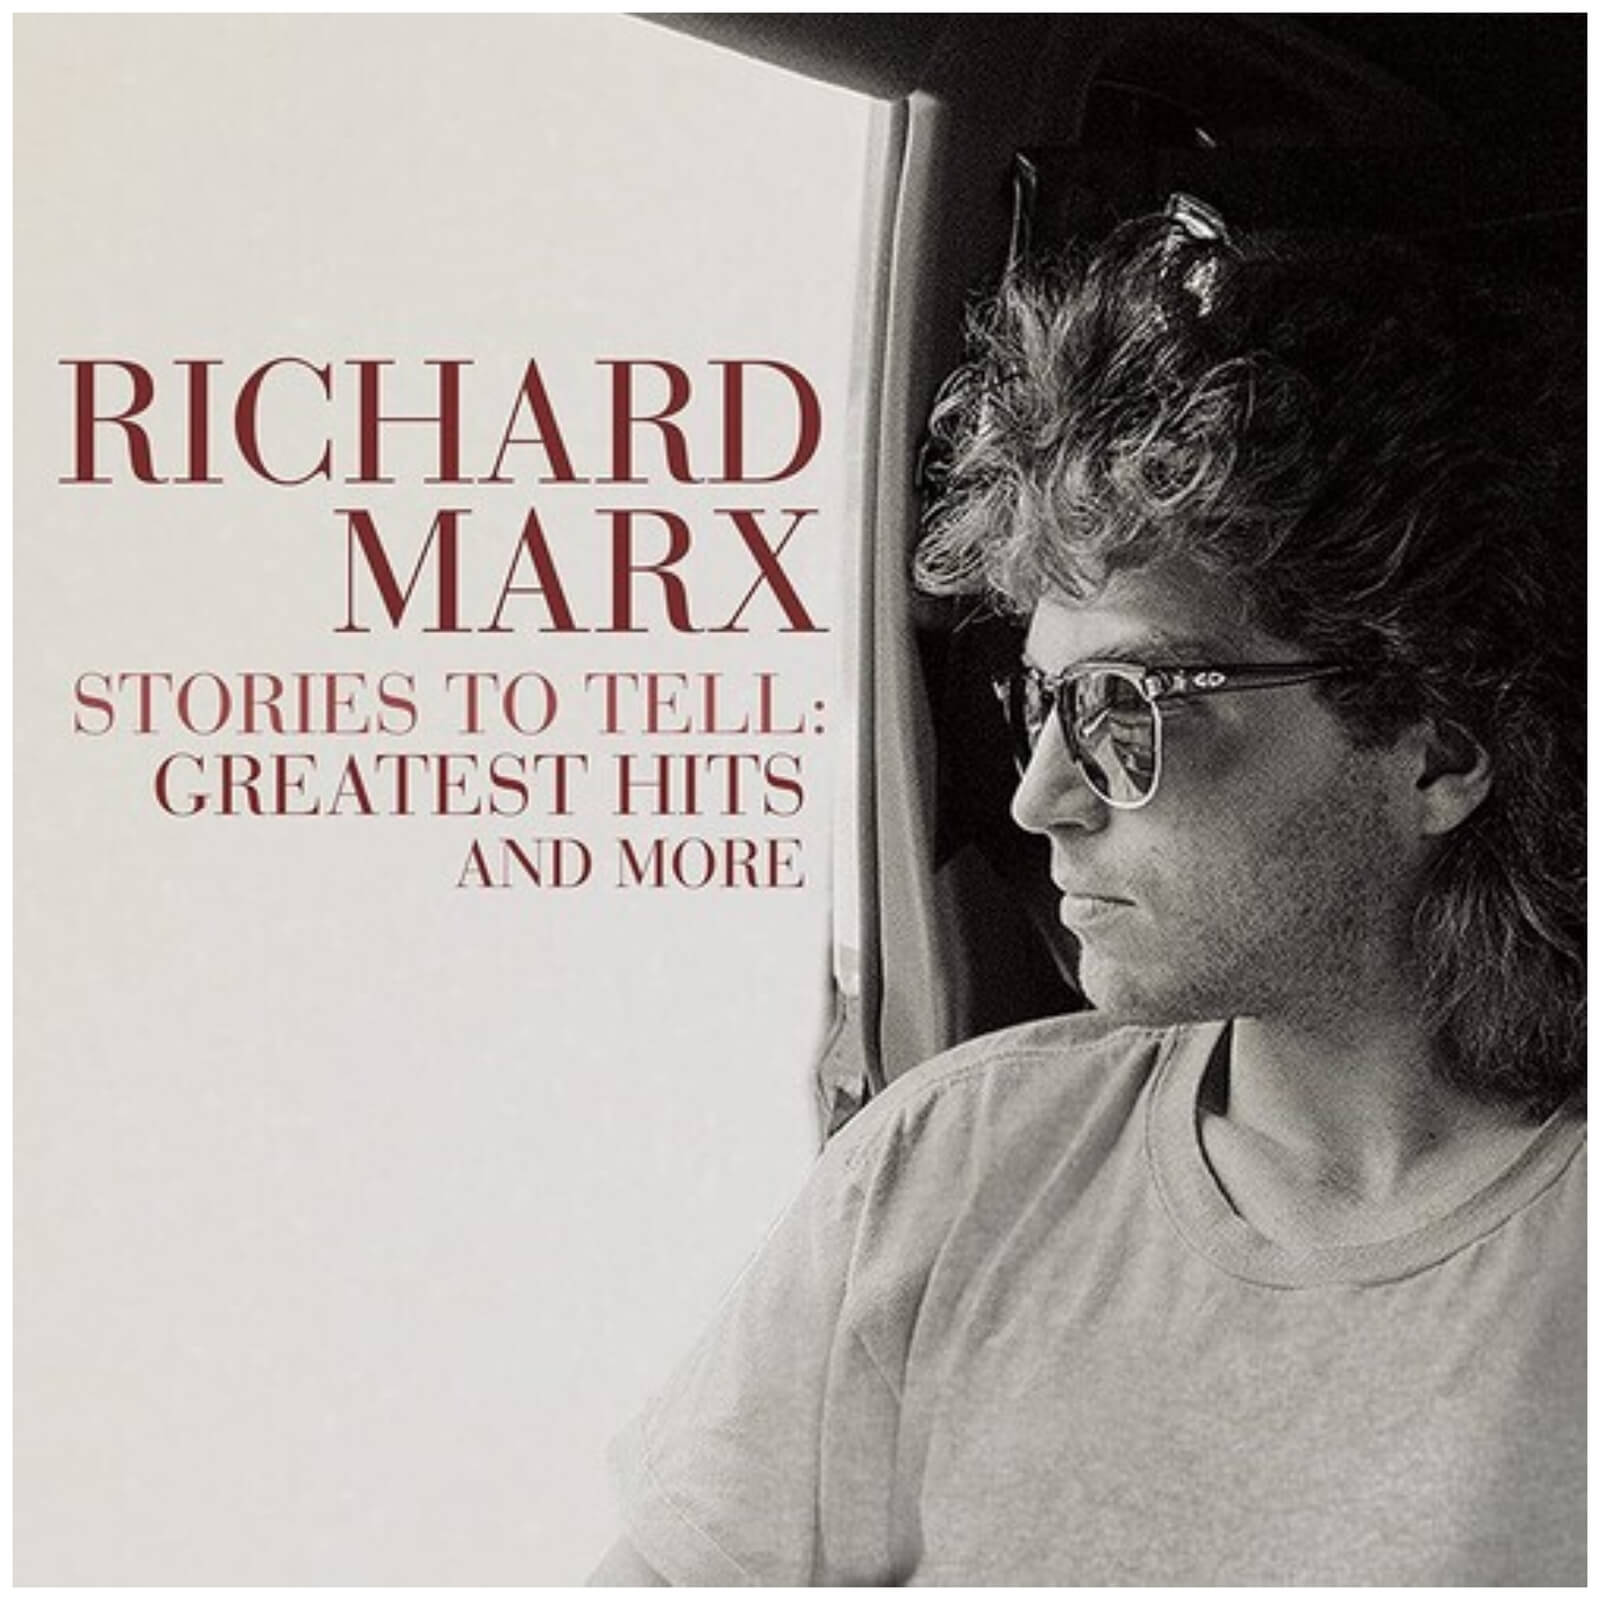 Richard Marx - Stories To Tell: Greatest Hits And More Vinyl 2LP